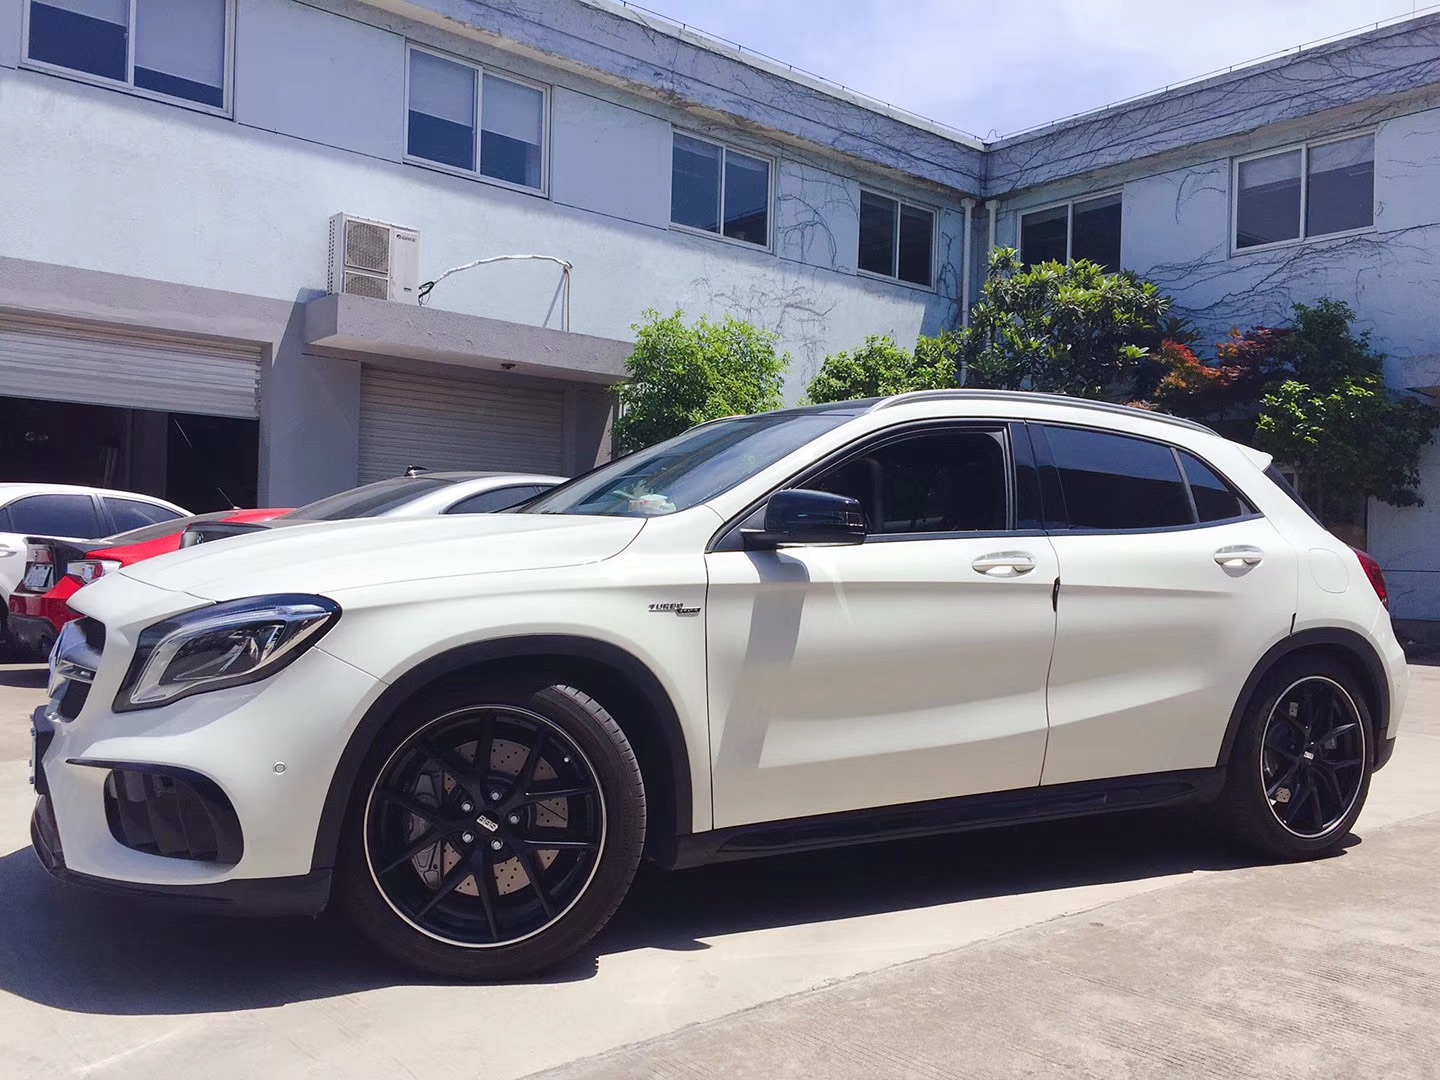 Mercedes-Benz GLA Class with 19-inch BBS CI-R